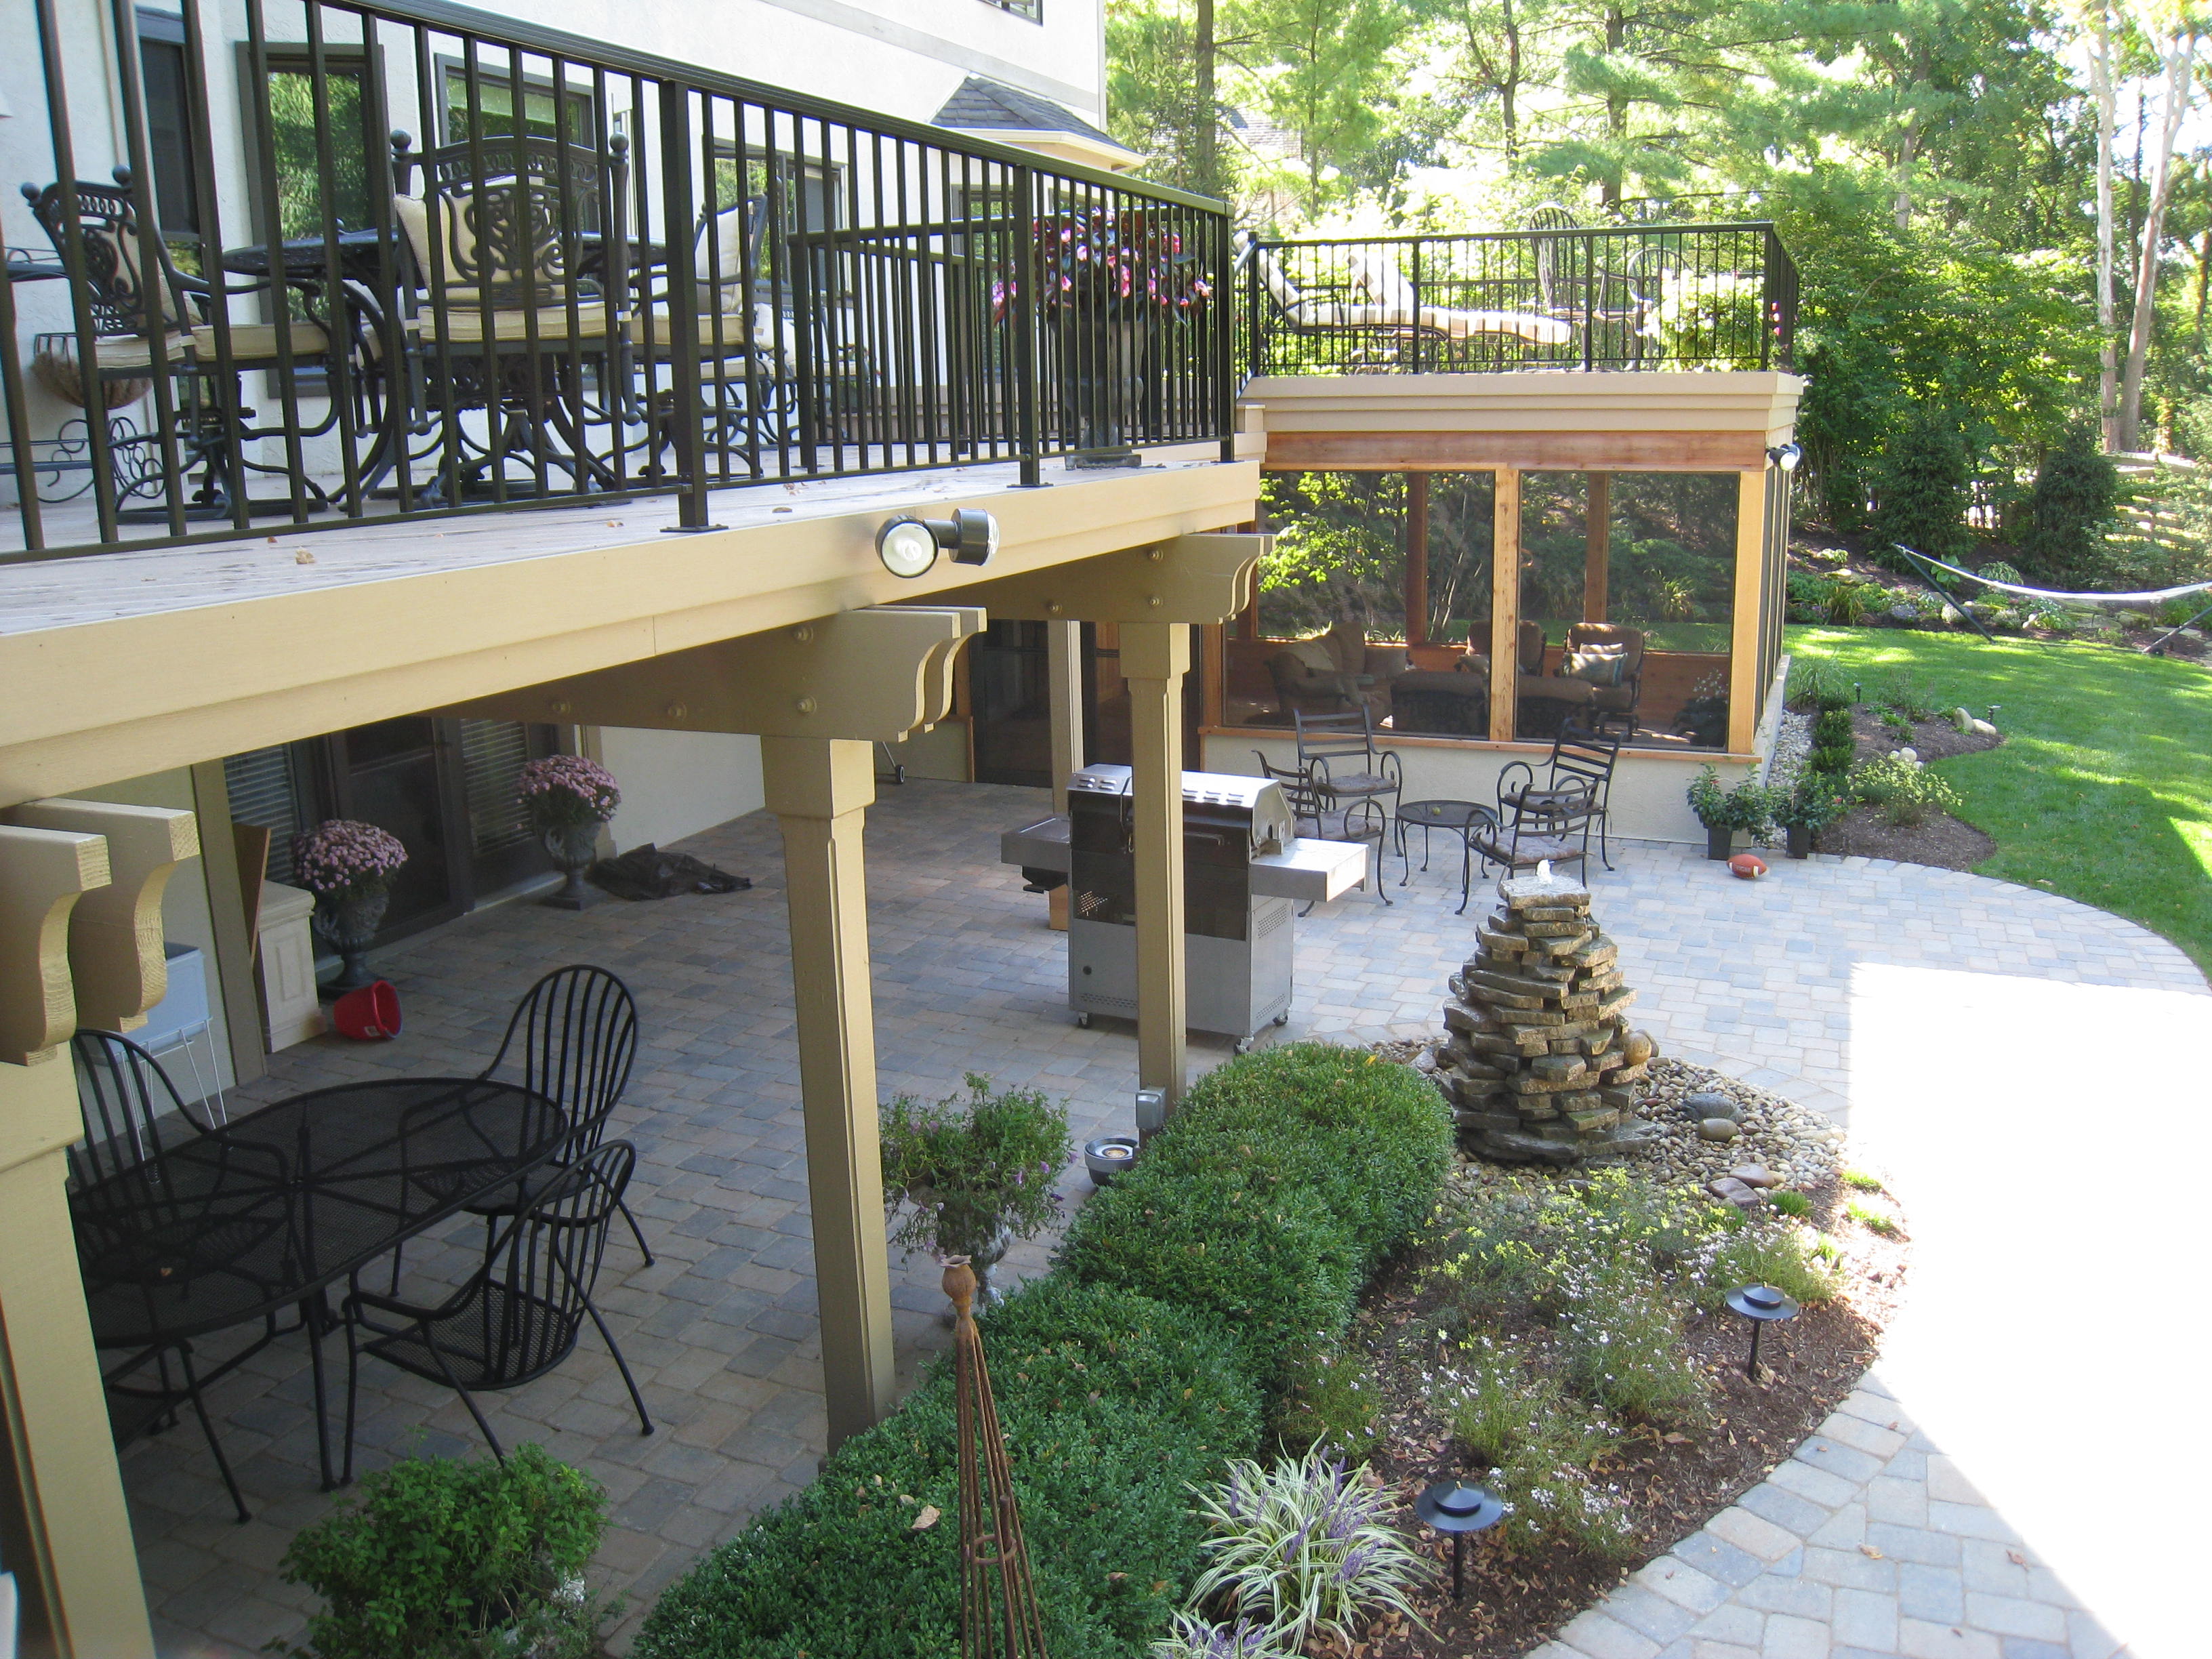 Plan Your Dream Backyard Now – Built It In Phases | Archadeck ...